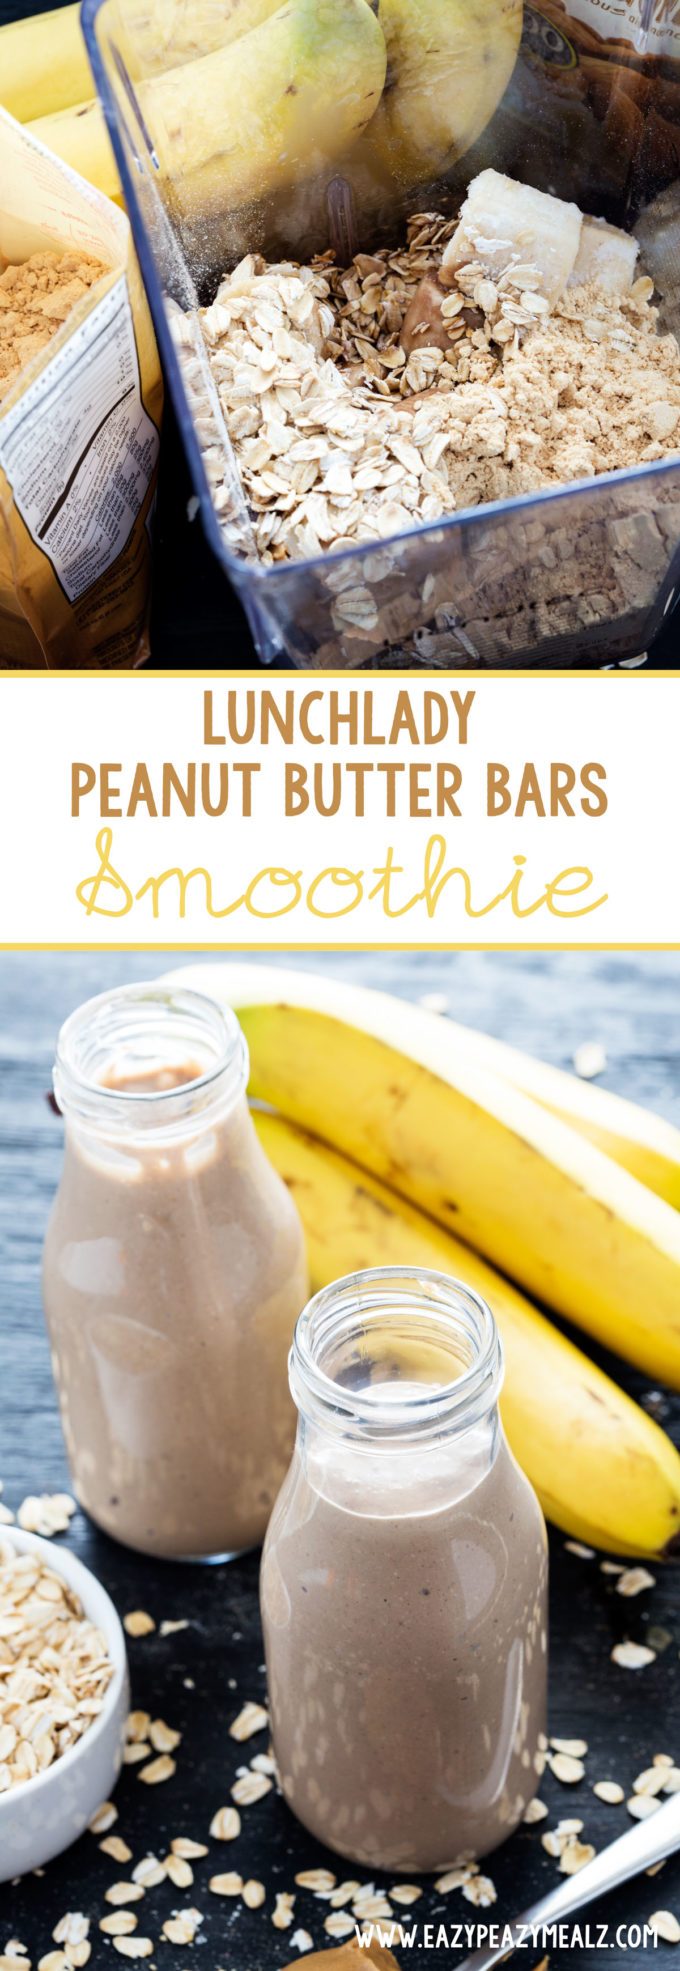 Lunch lady peanut butter bars in a new smoothie form. Delicious, easy, and full of protein. Dairy free too!